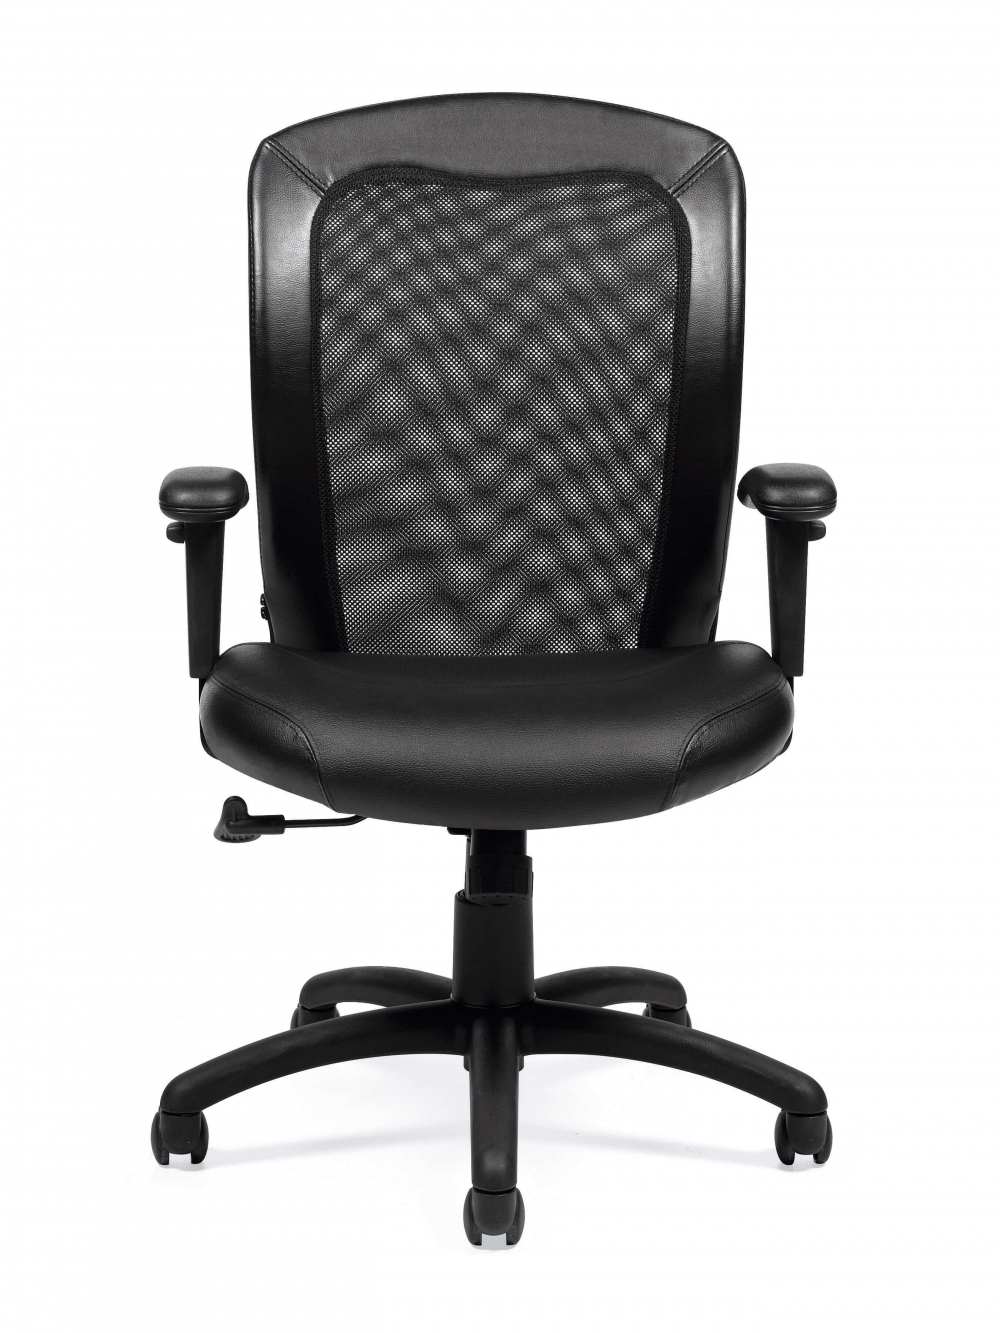 Contemporary office chair front view